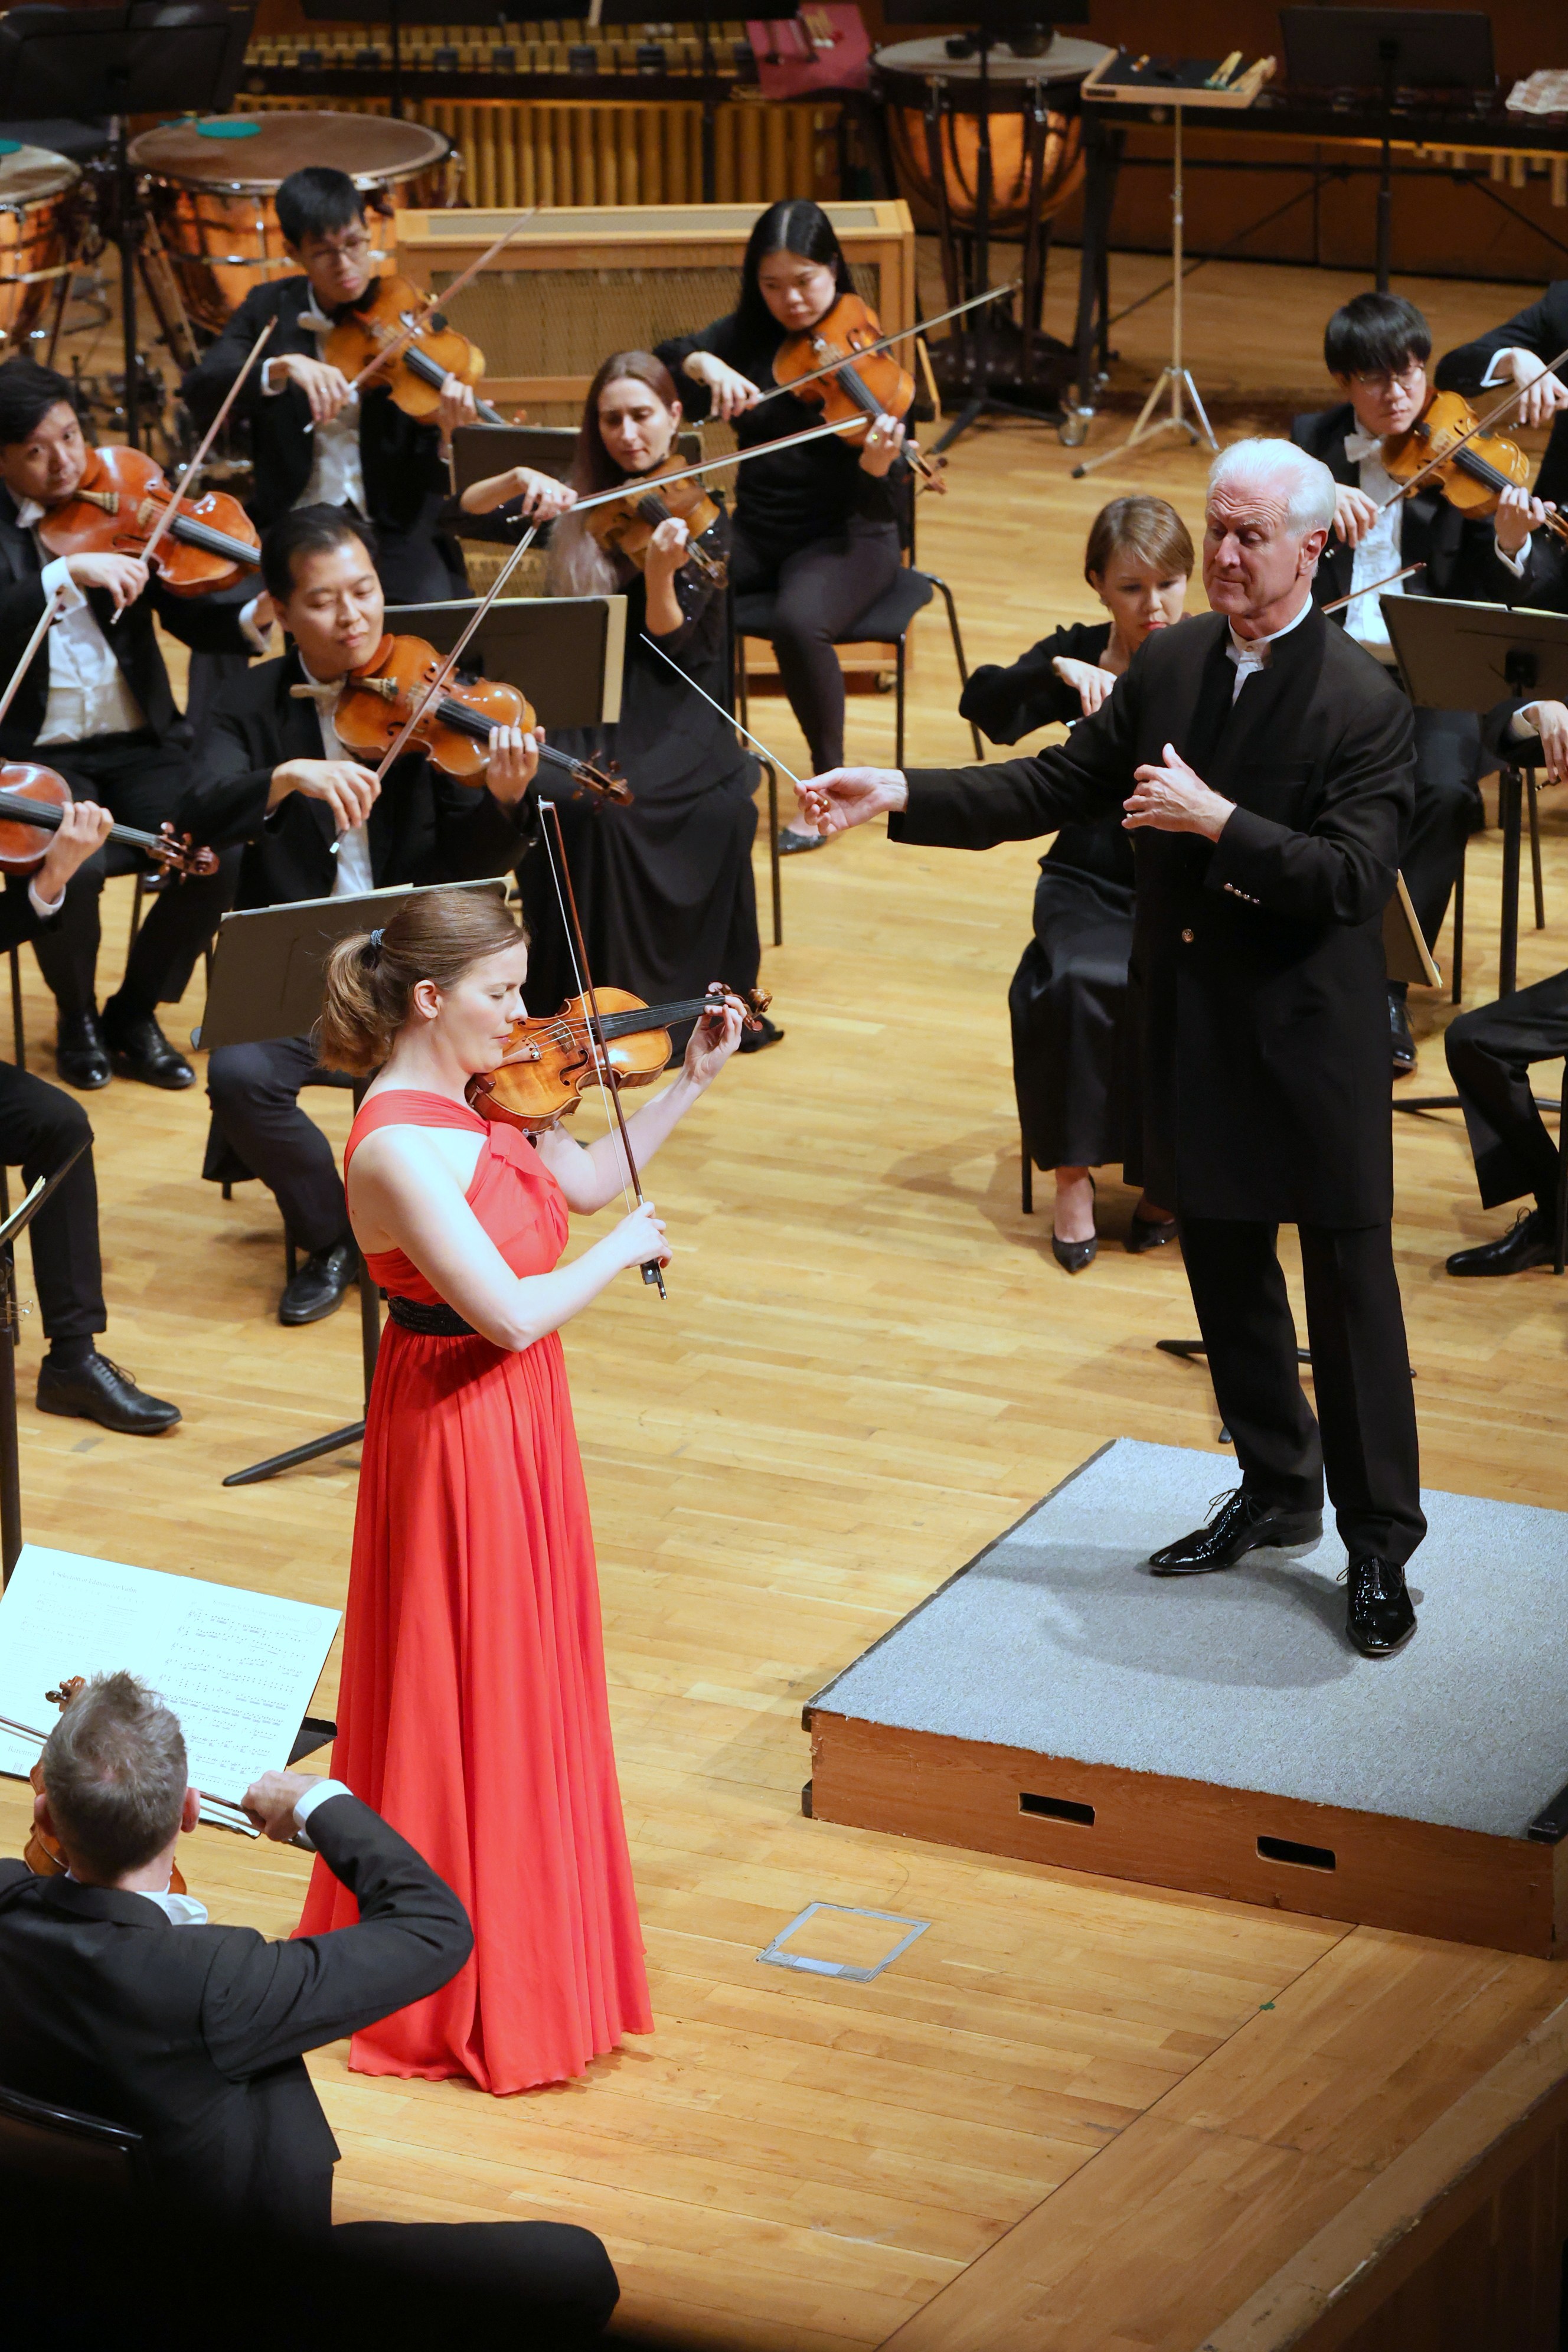 German violinist Veronika Eberle performs with the Hong Kong Sinfonietta under the baton of its music director, Christopher Poppen, in a concert of concertos by Hosokawa and Mozart and symphonies by the latter and by Schubert. Photo: Hong Kong Sinfonietta 